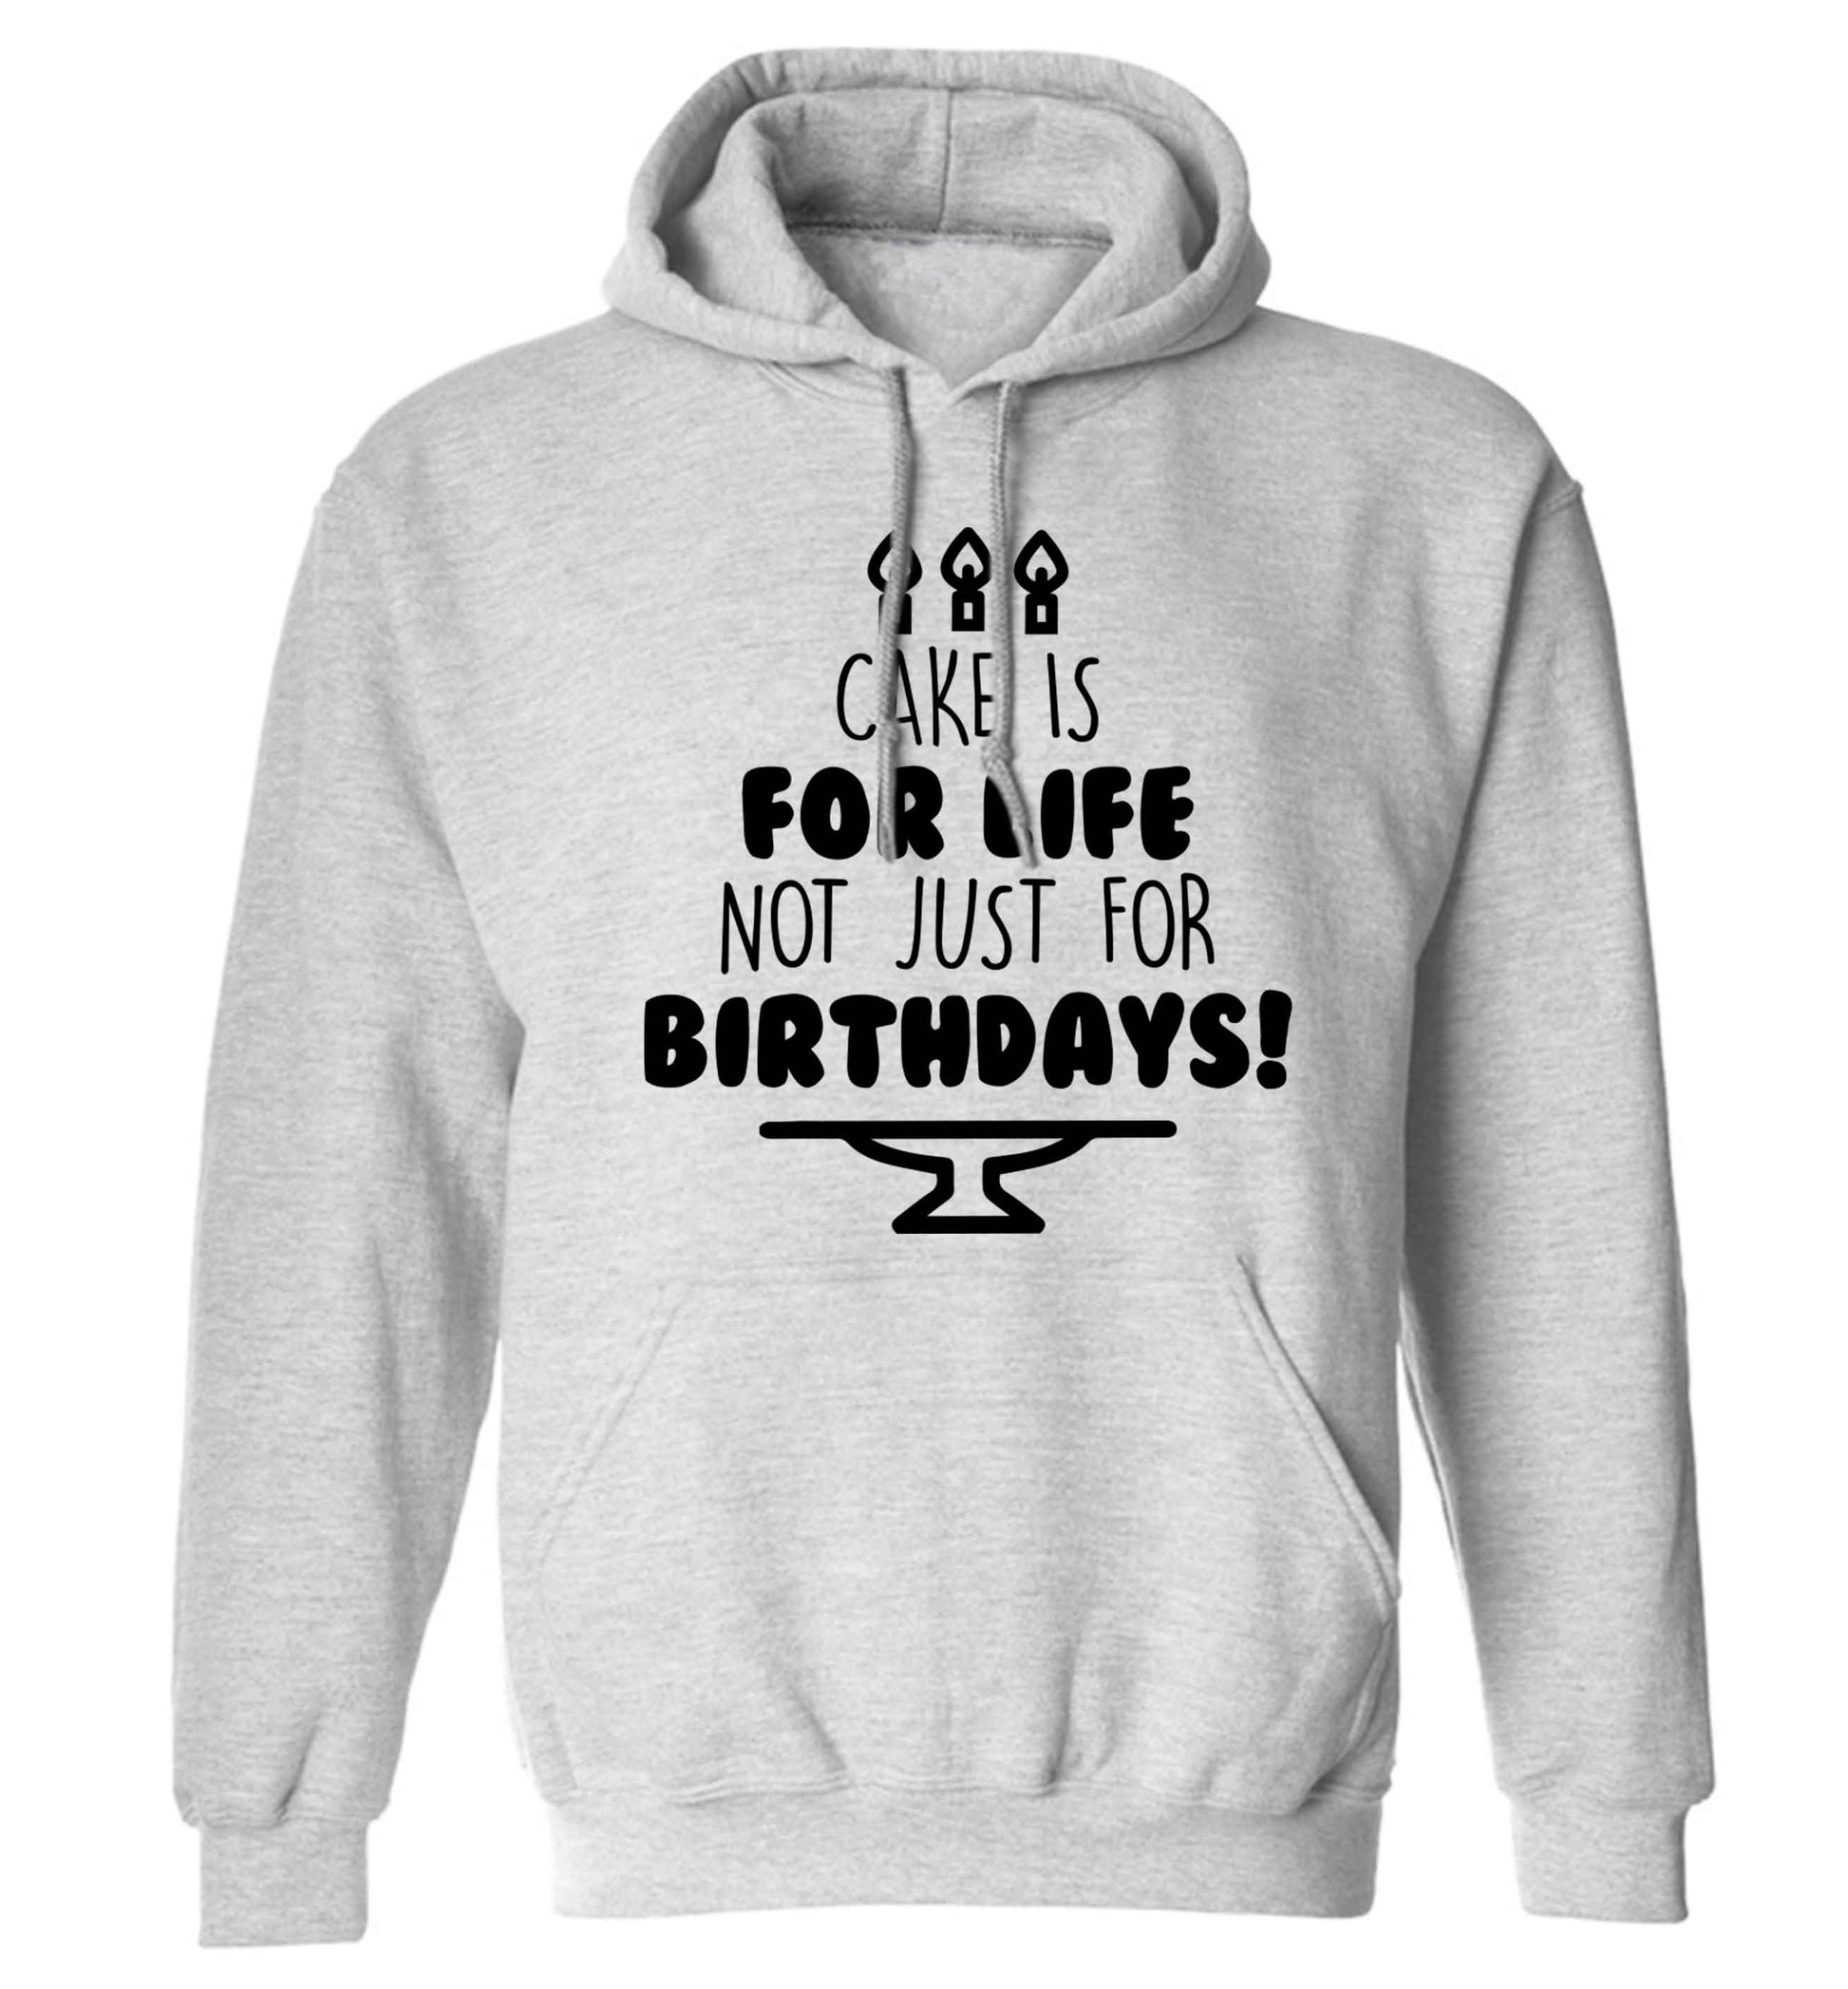 Cake is for life not just for birthdays adults unisex grey hoodie 2XL